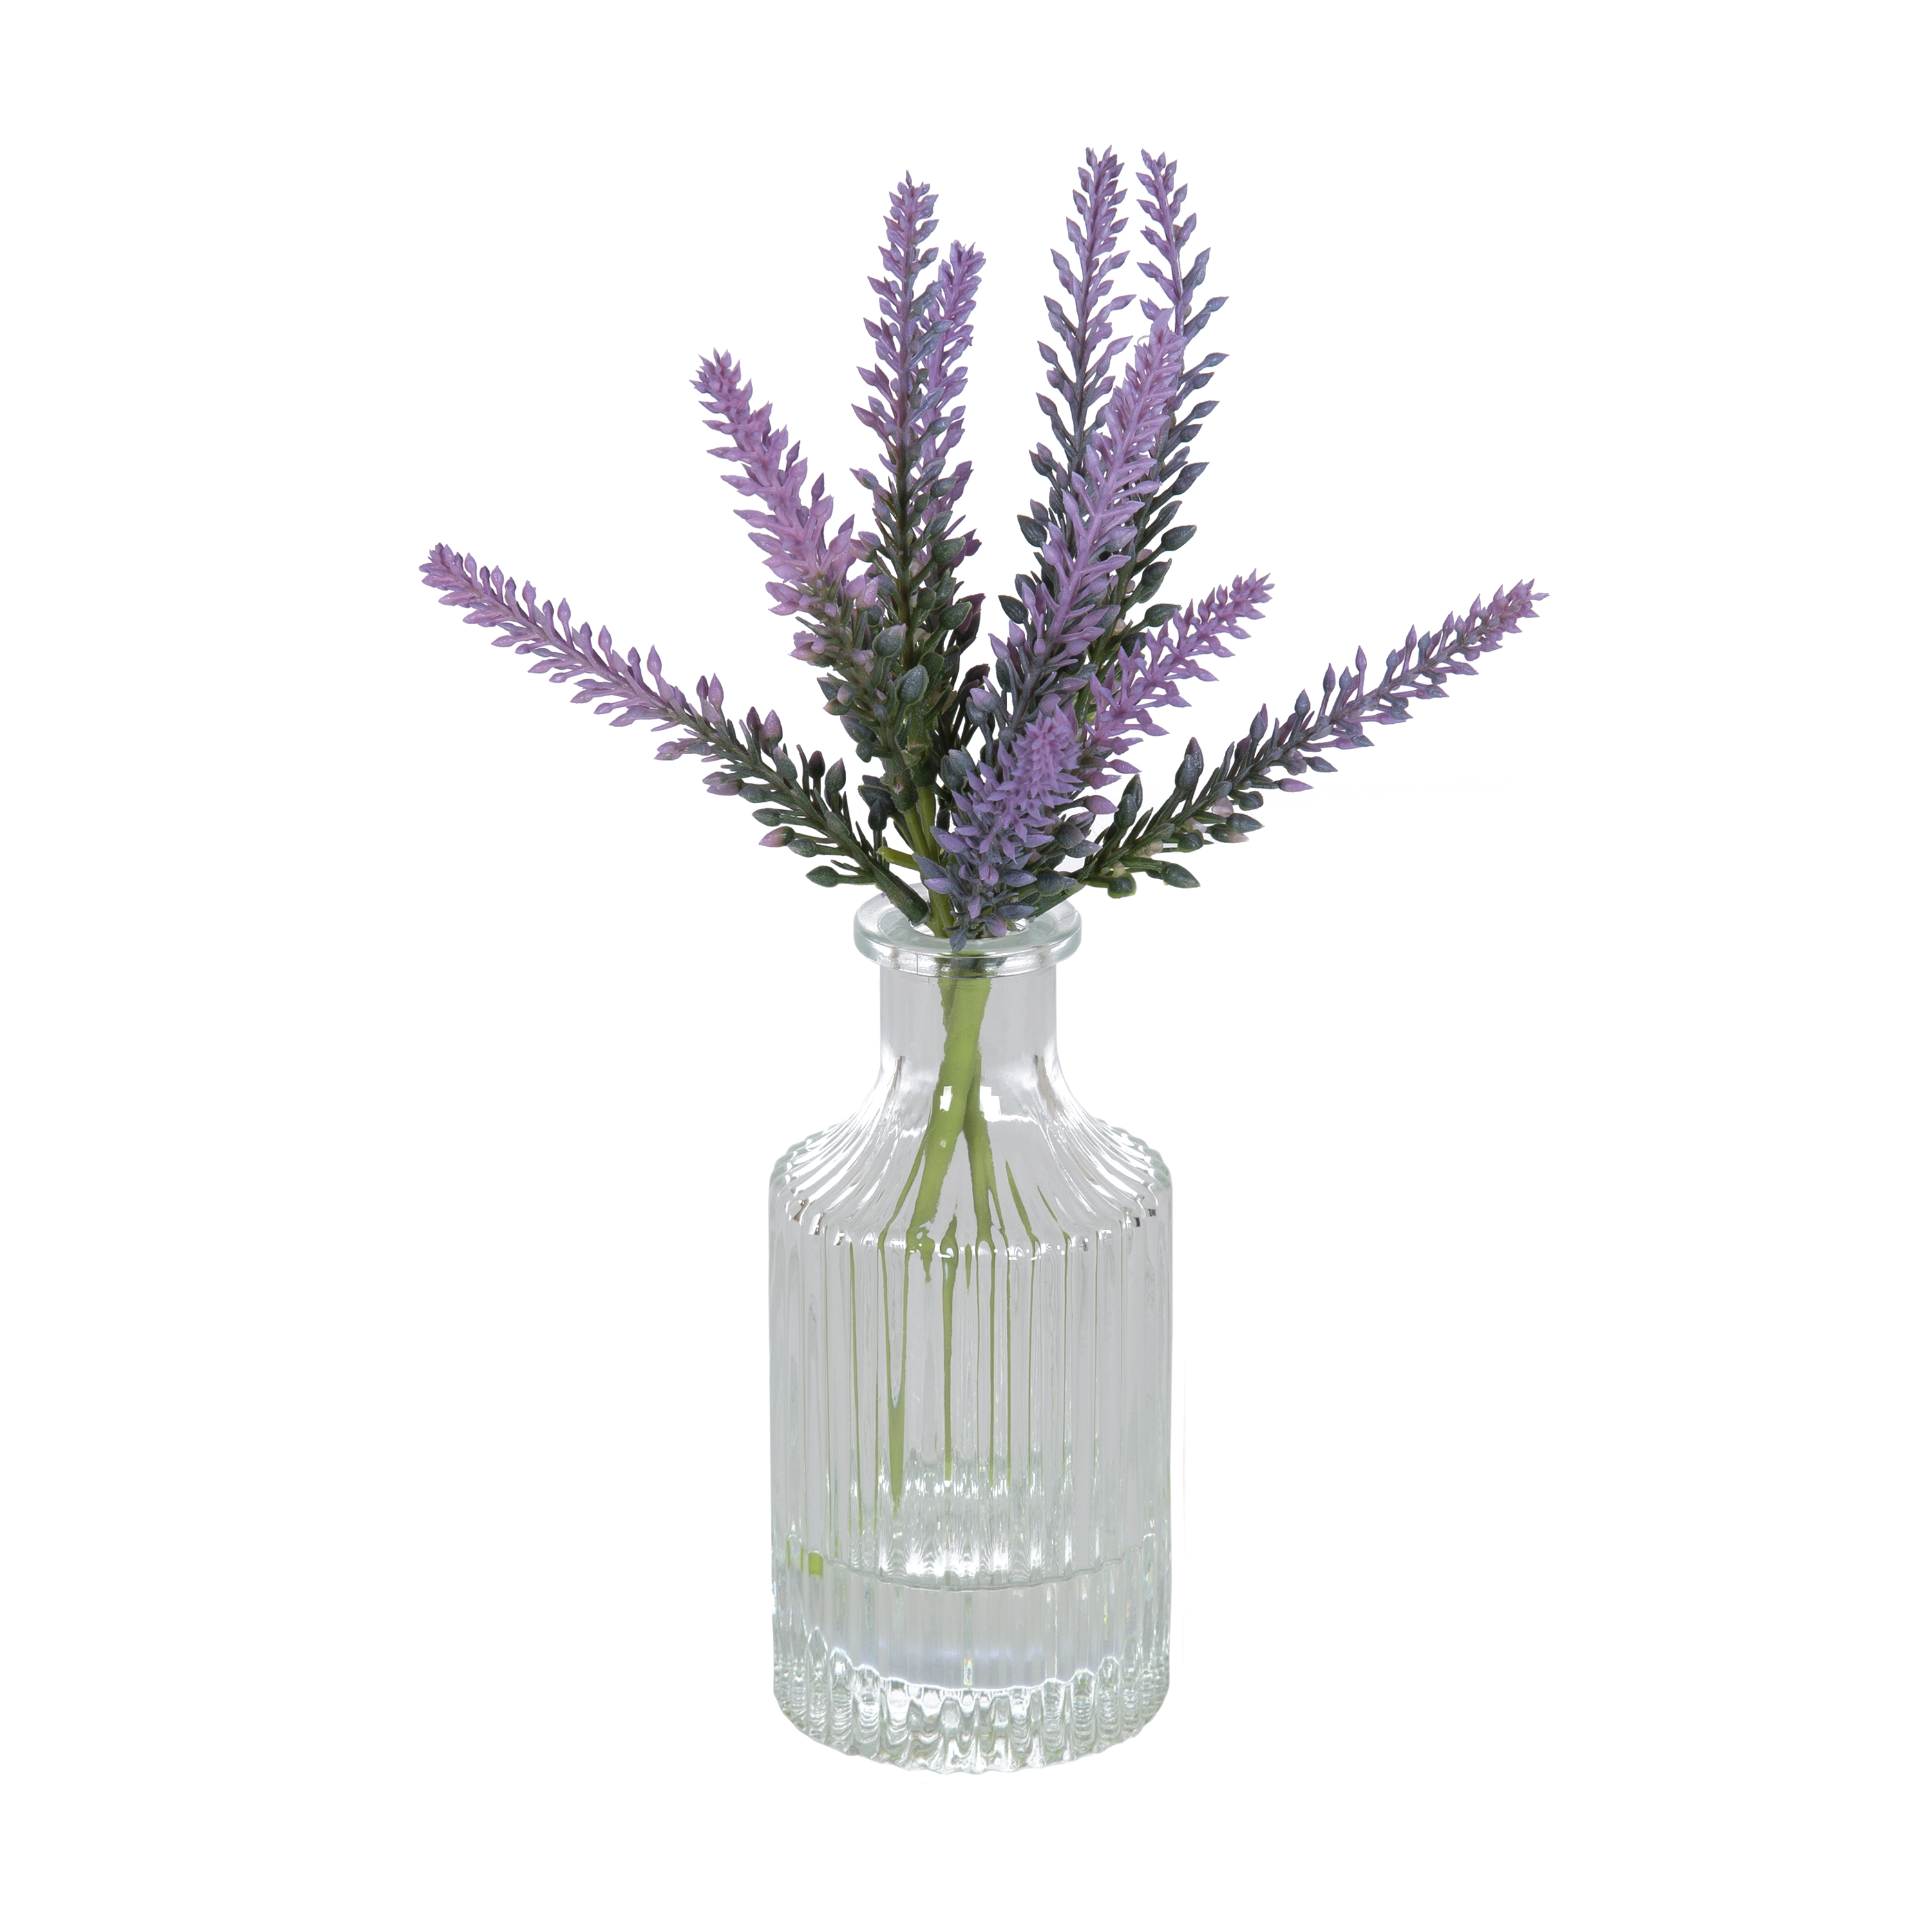 Mainstays 10.5" Artificial Lavender Flower Stems in Ribbed Glass Vase - image 1 of 10